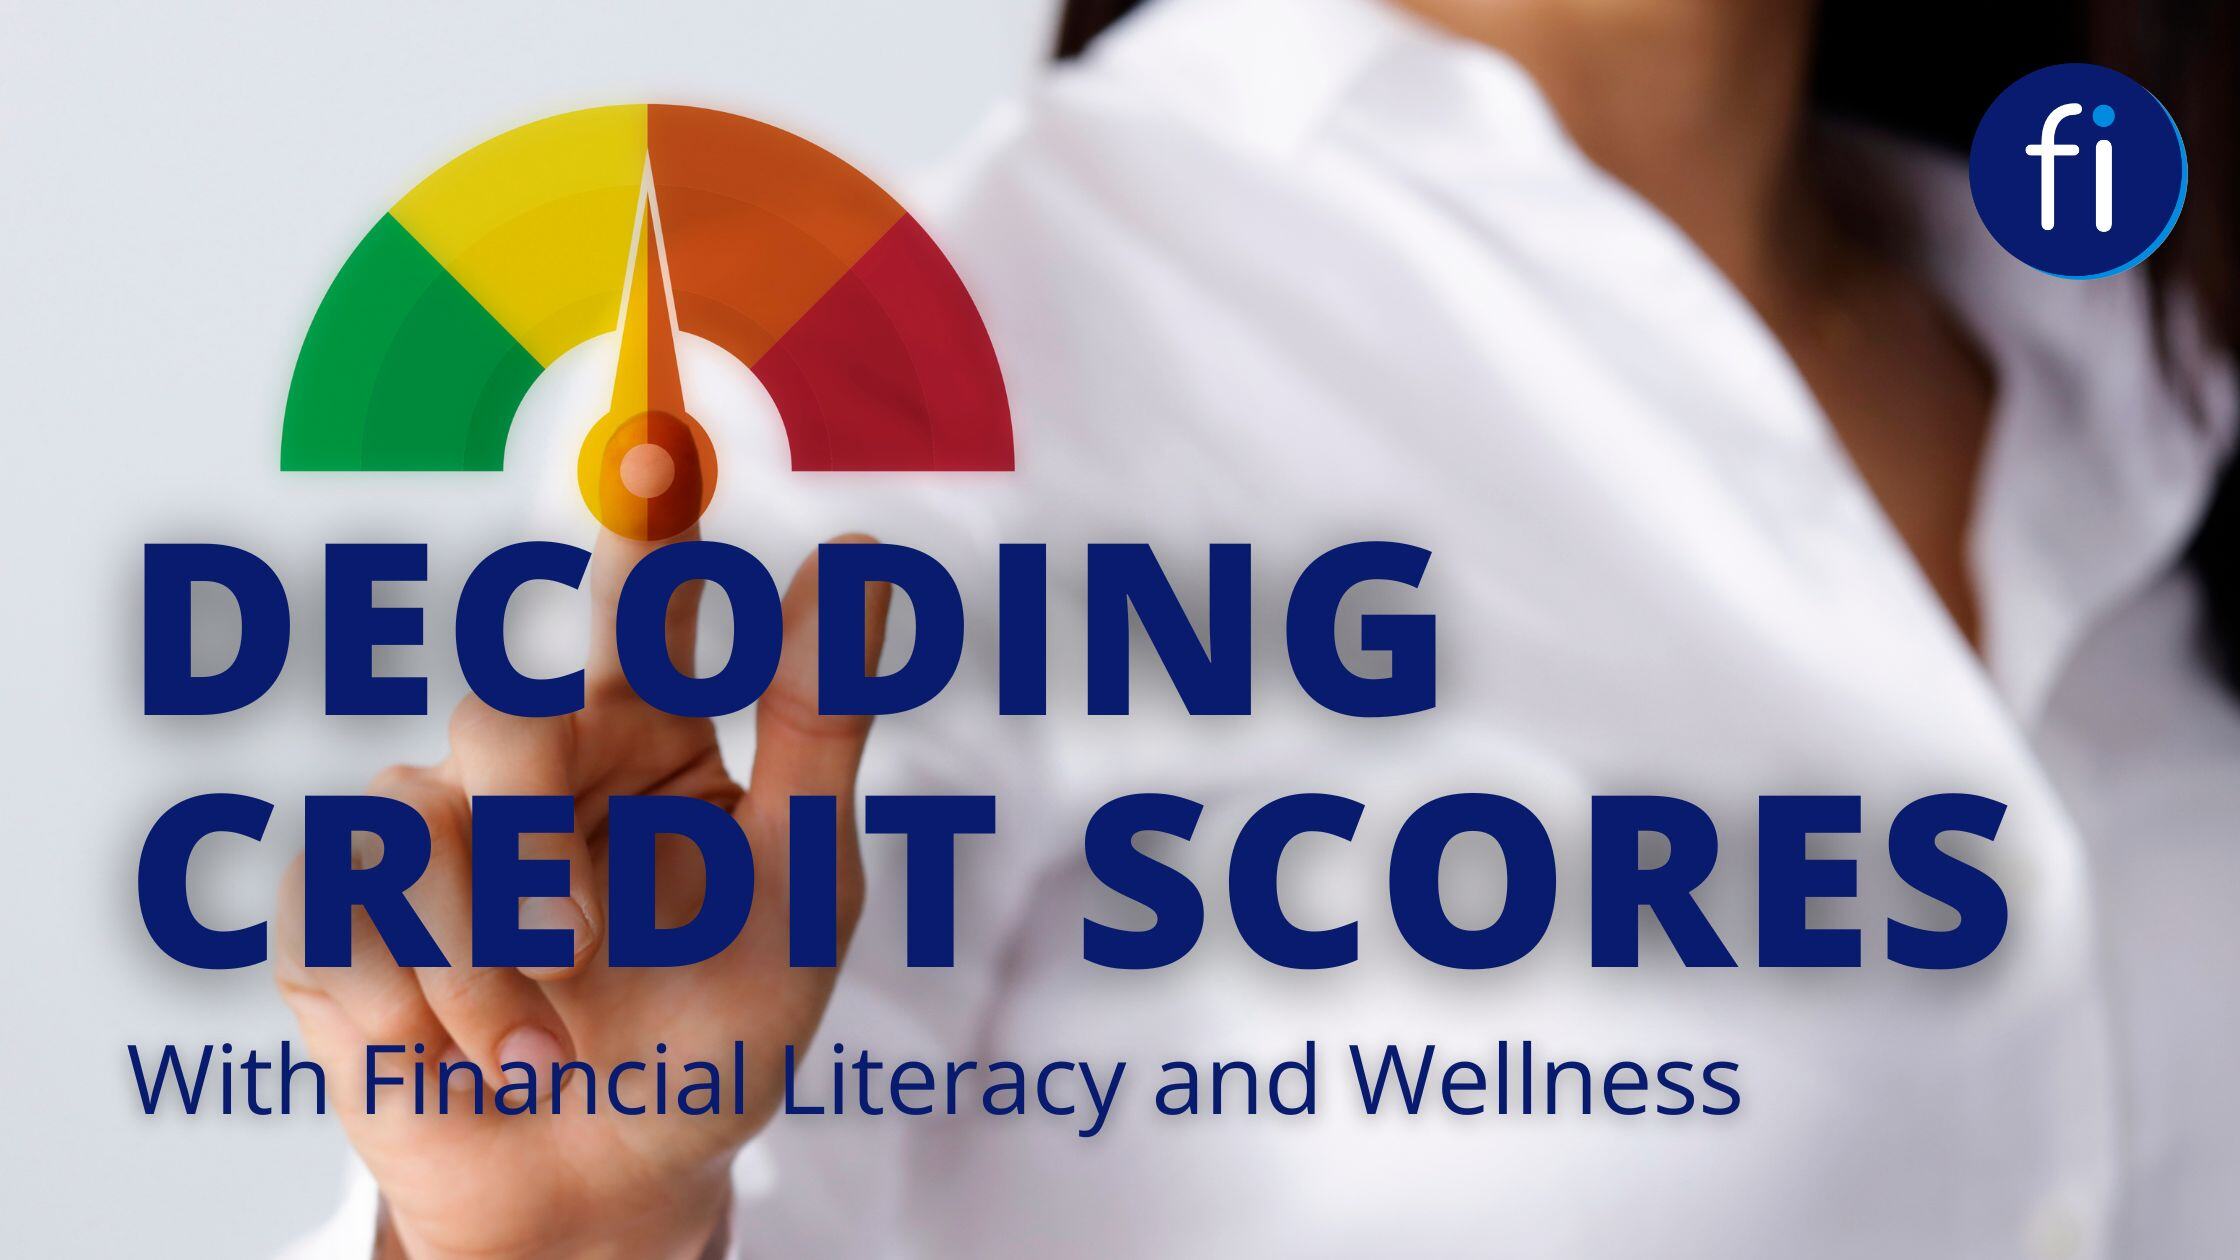 Decoding Credit Scores with Financial Literacy and Wellness